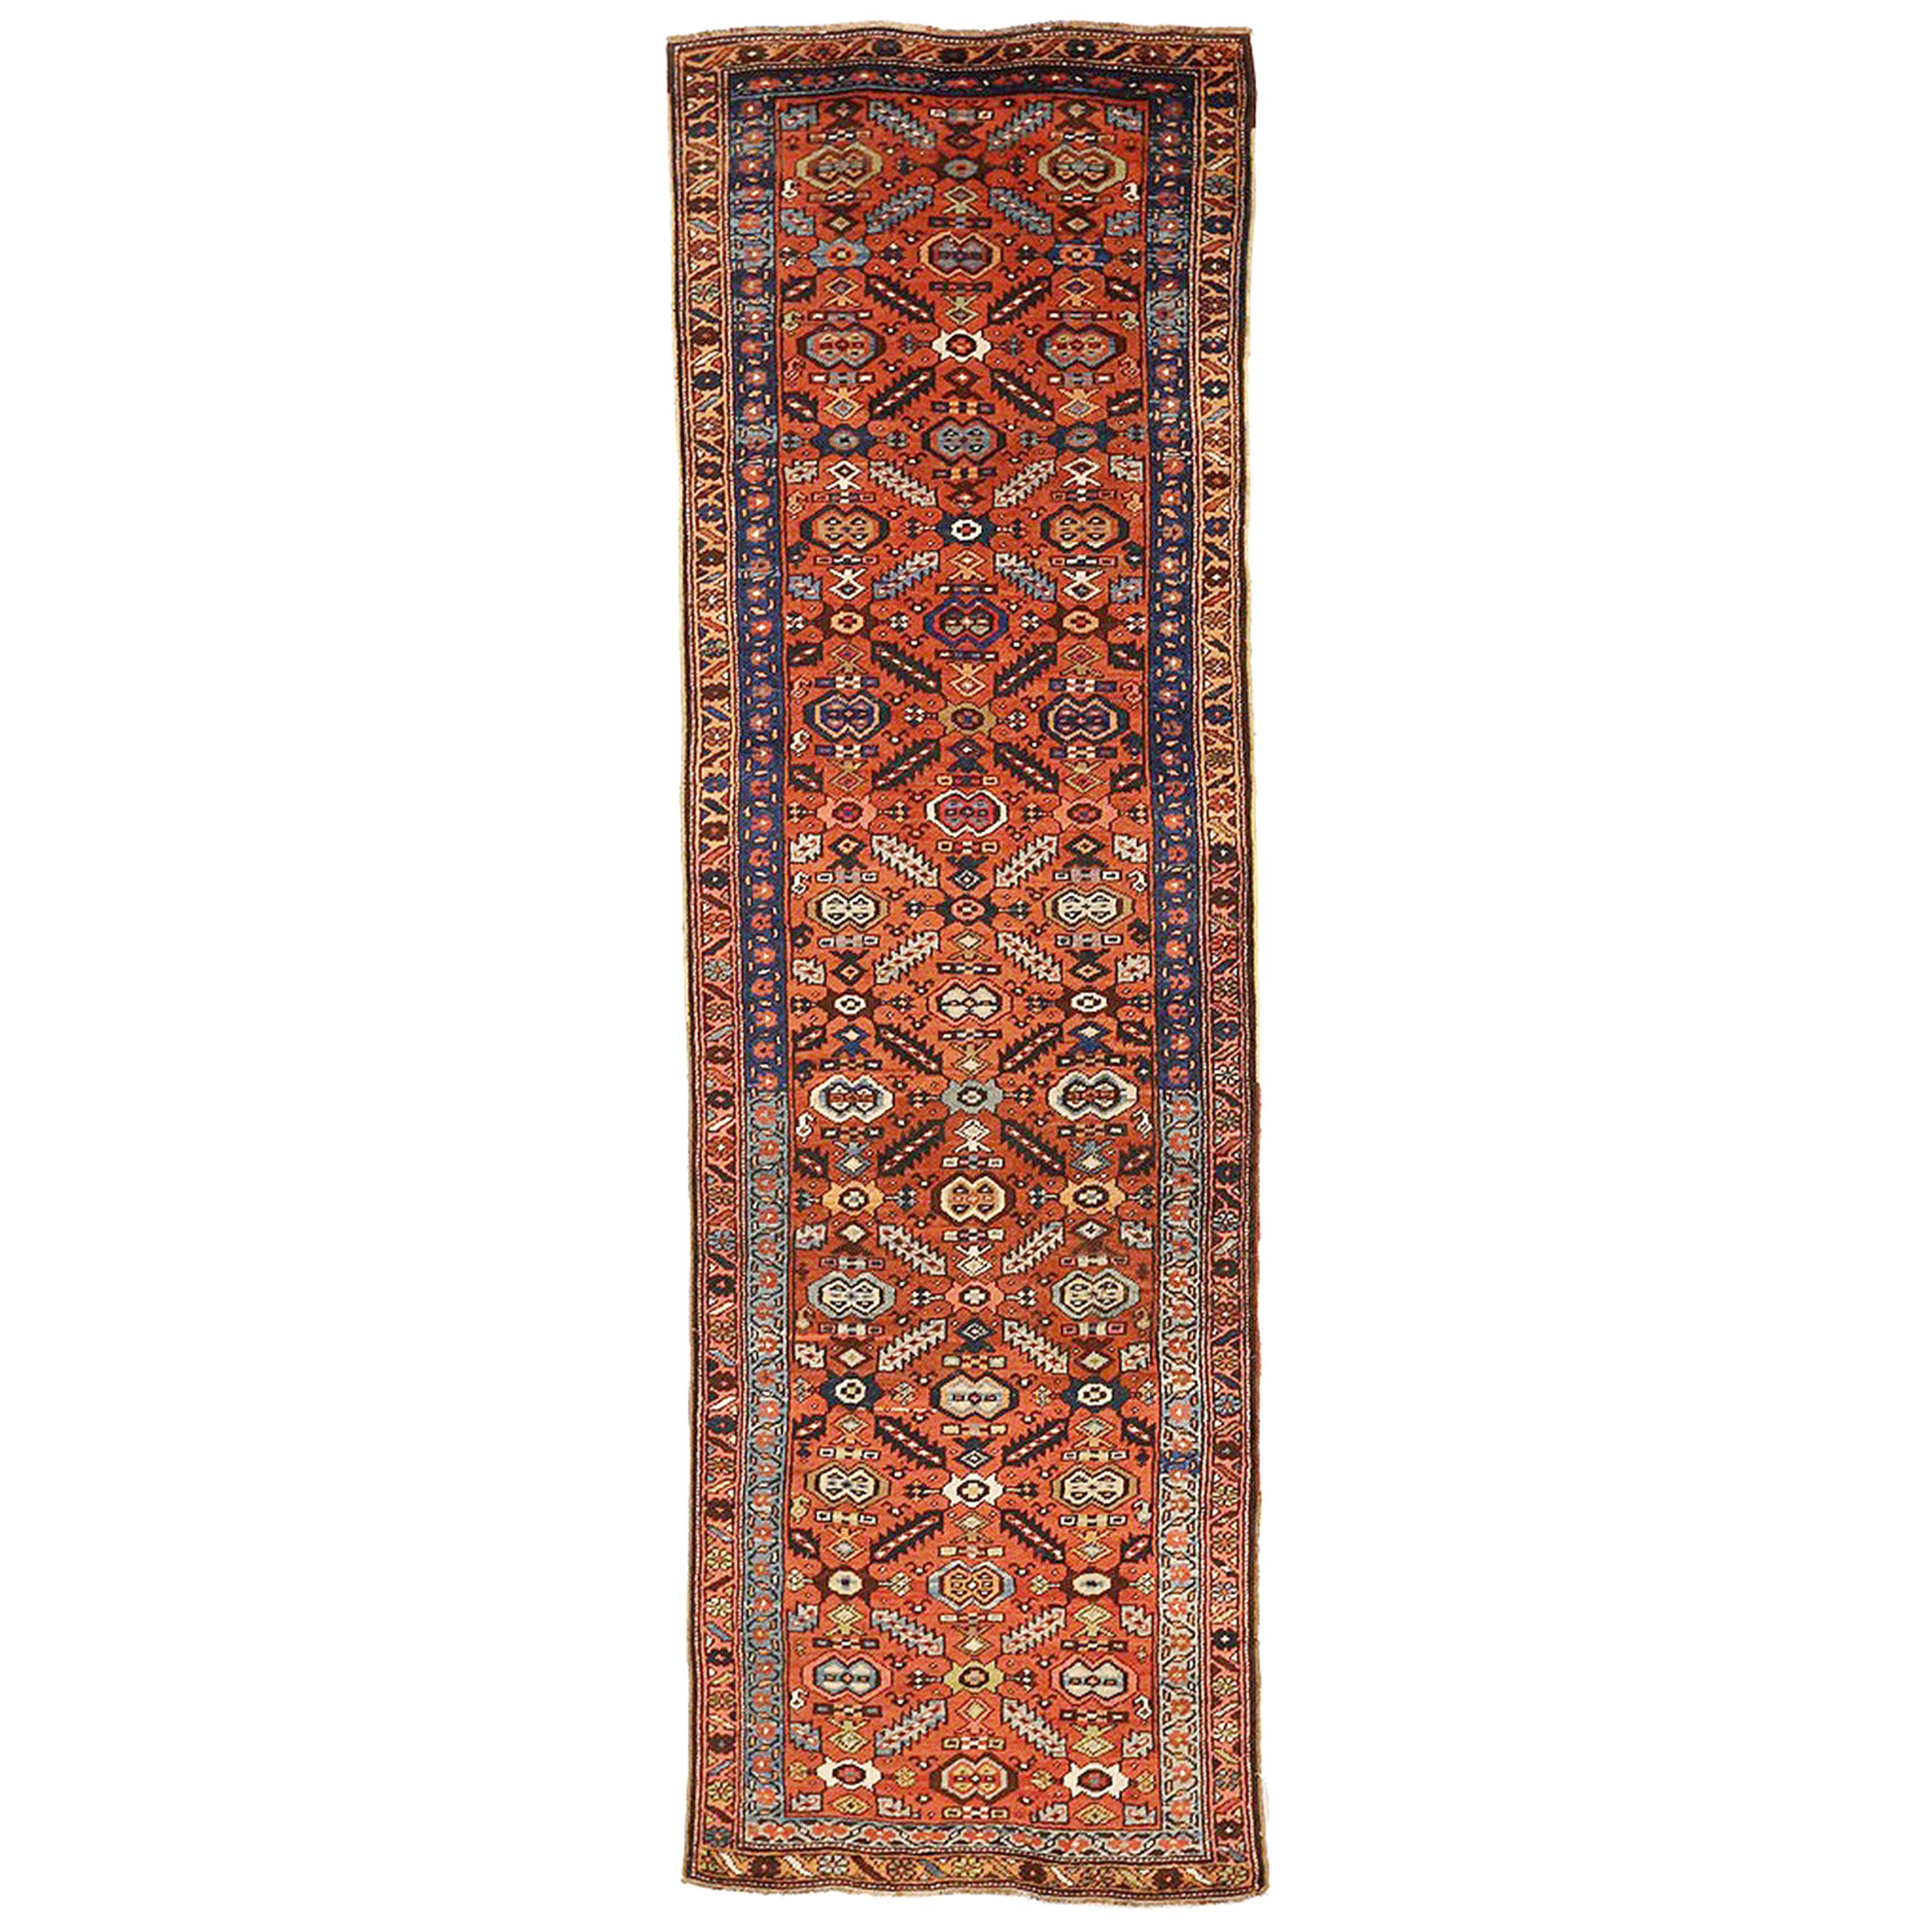 Antique Persian Bijar Runner Rug with Blue & White Floral Medallions